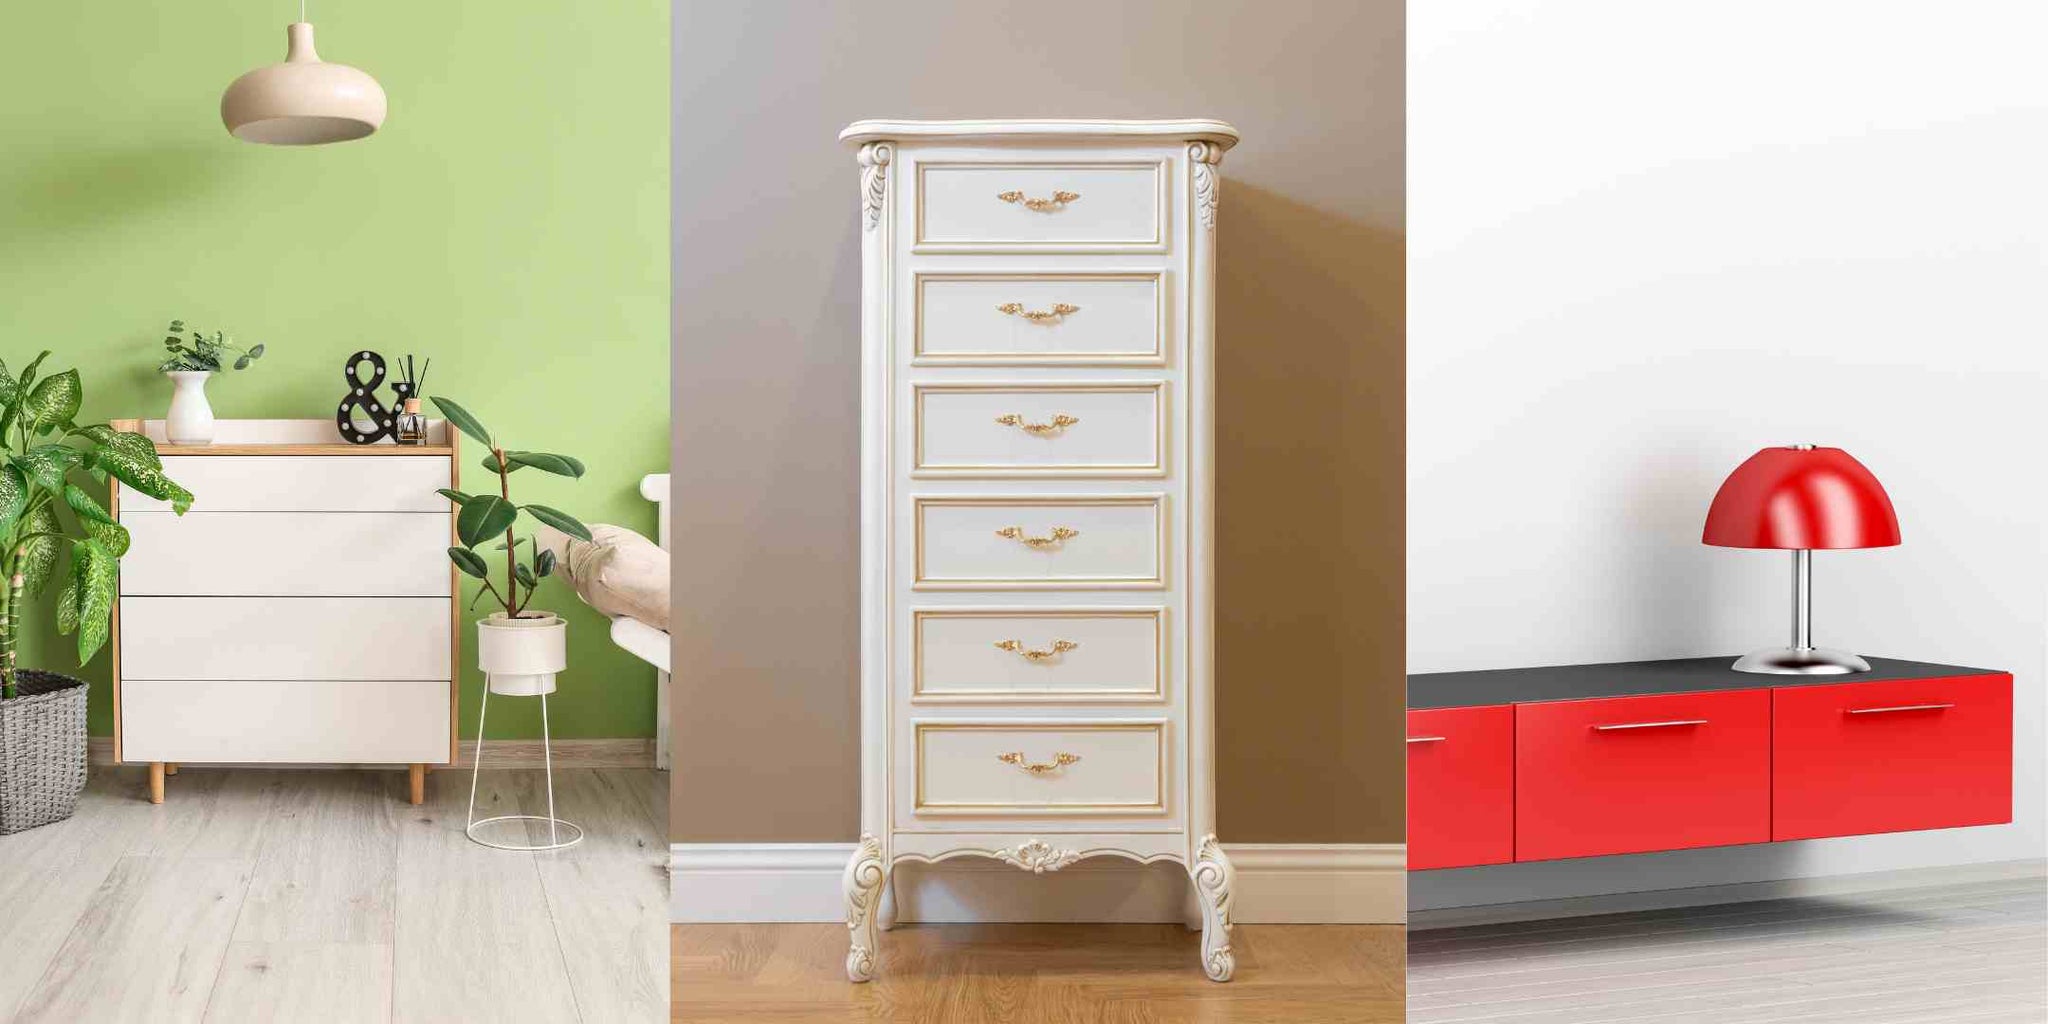 Types of Space-Saving Chest of Drawers and Their Benefits